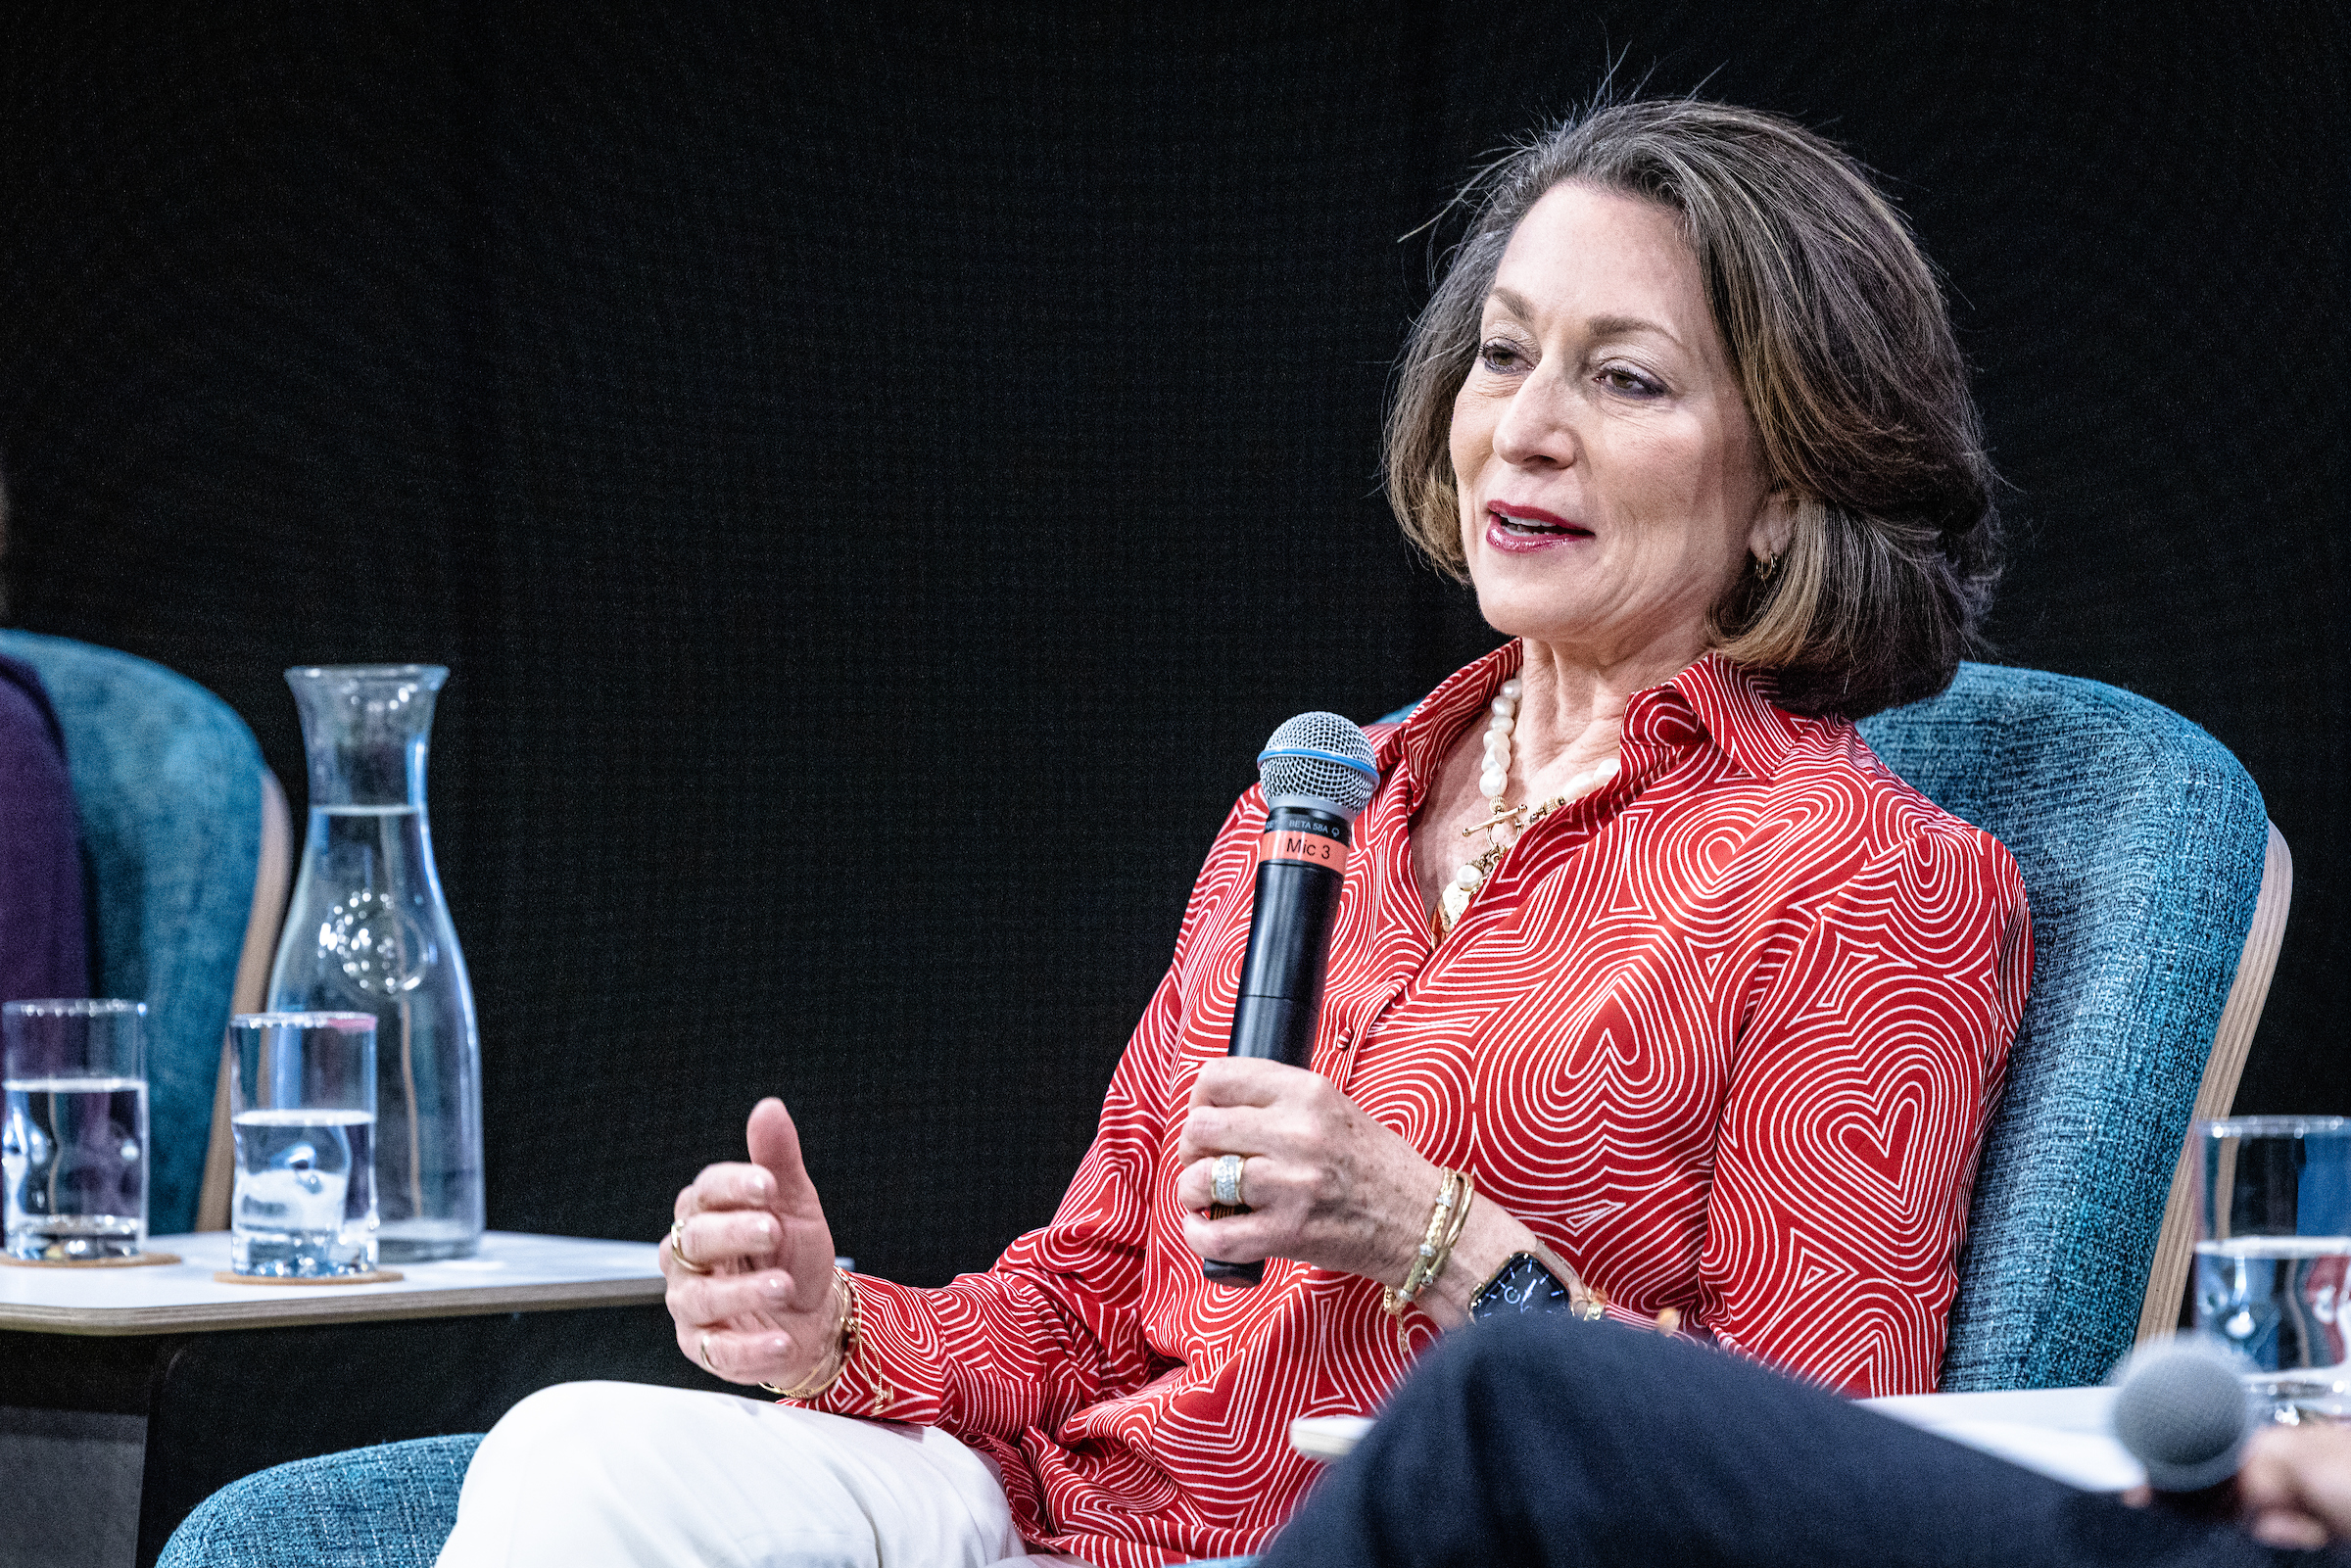 A woman on a panel speaks into a mic